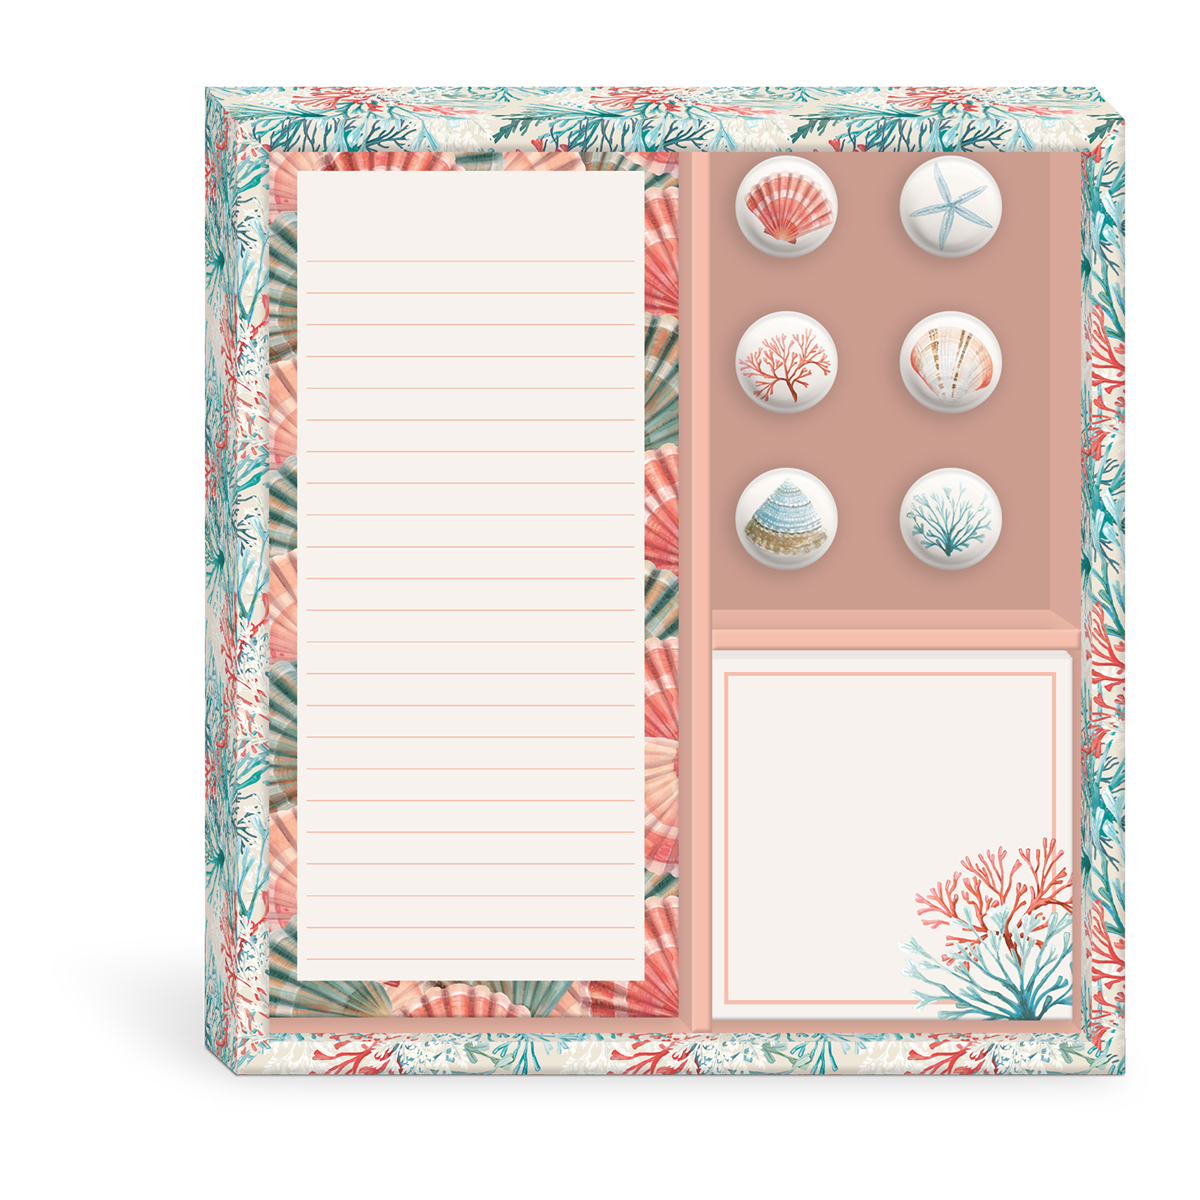 Water’s Edge Notepads and Magnets Set